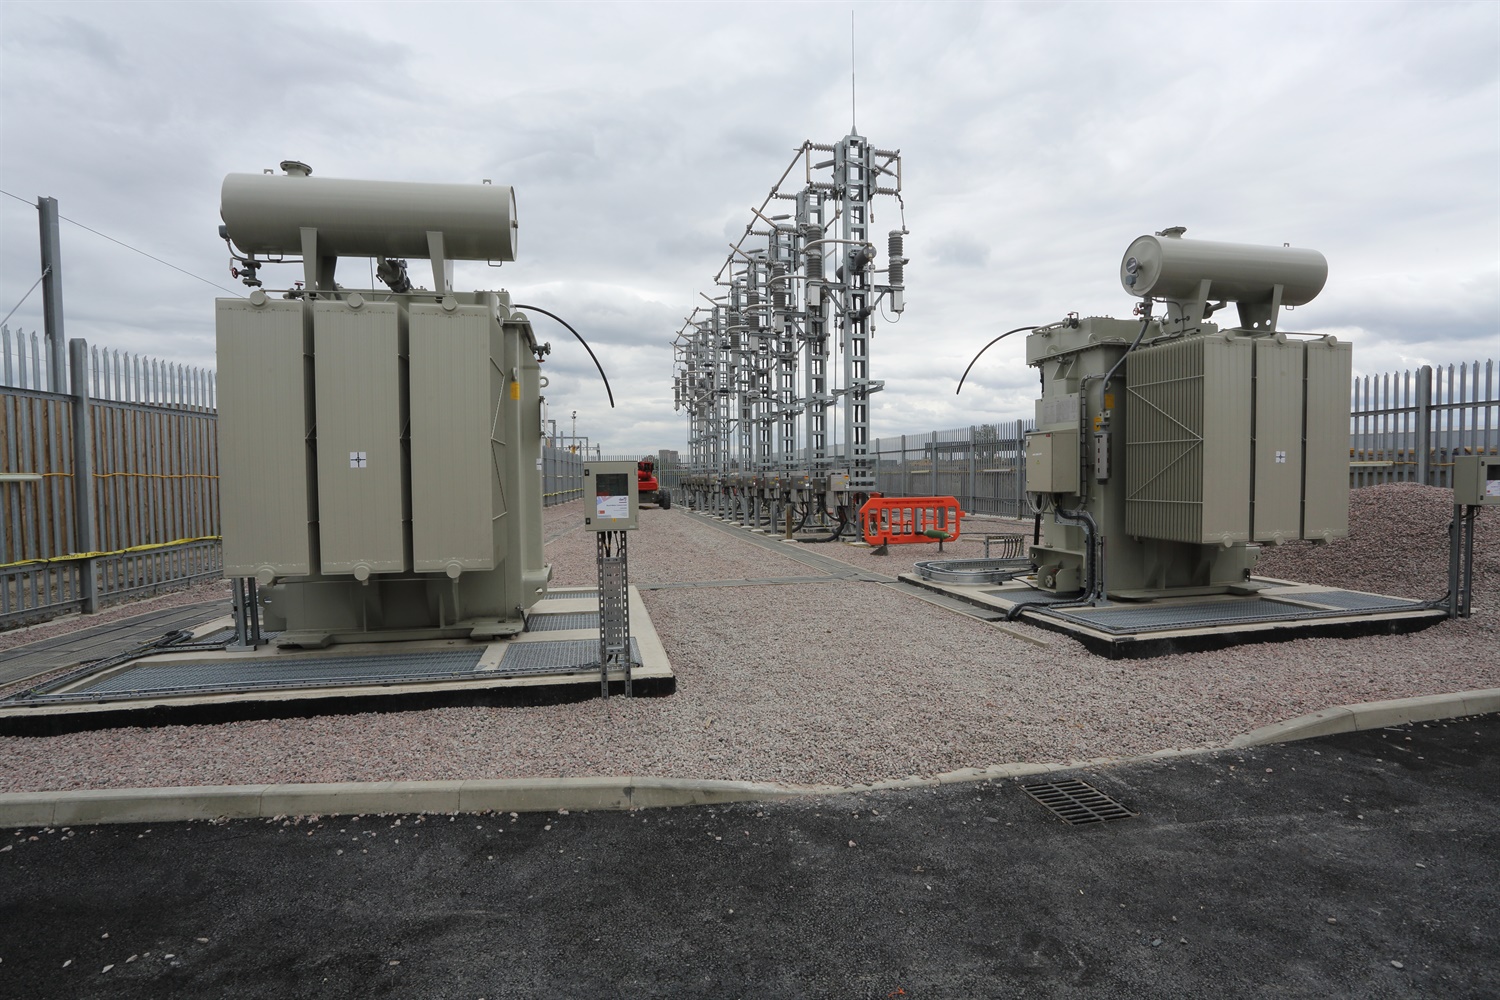 20 Auto-transformers and high voltage masts installed at Plumstead 270001